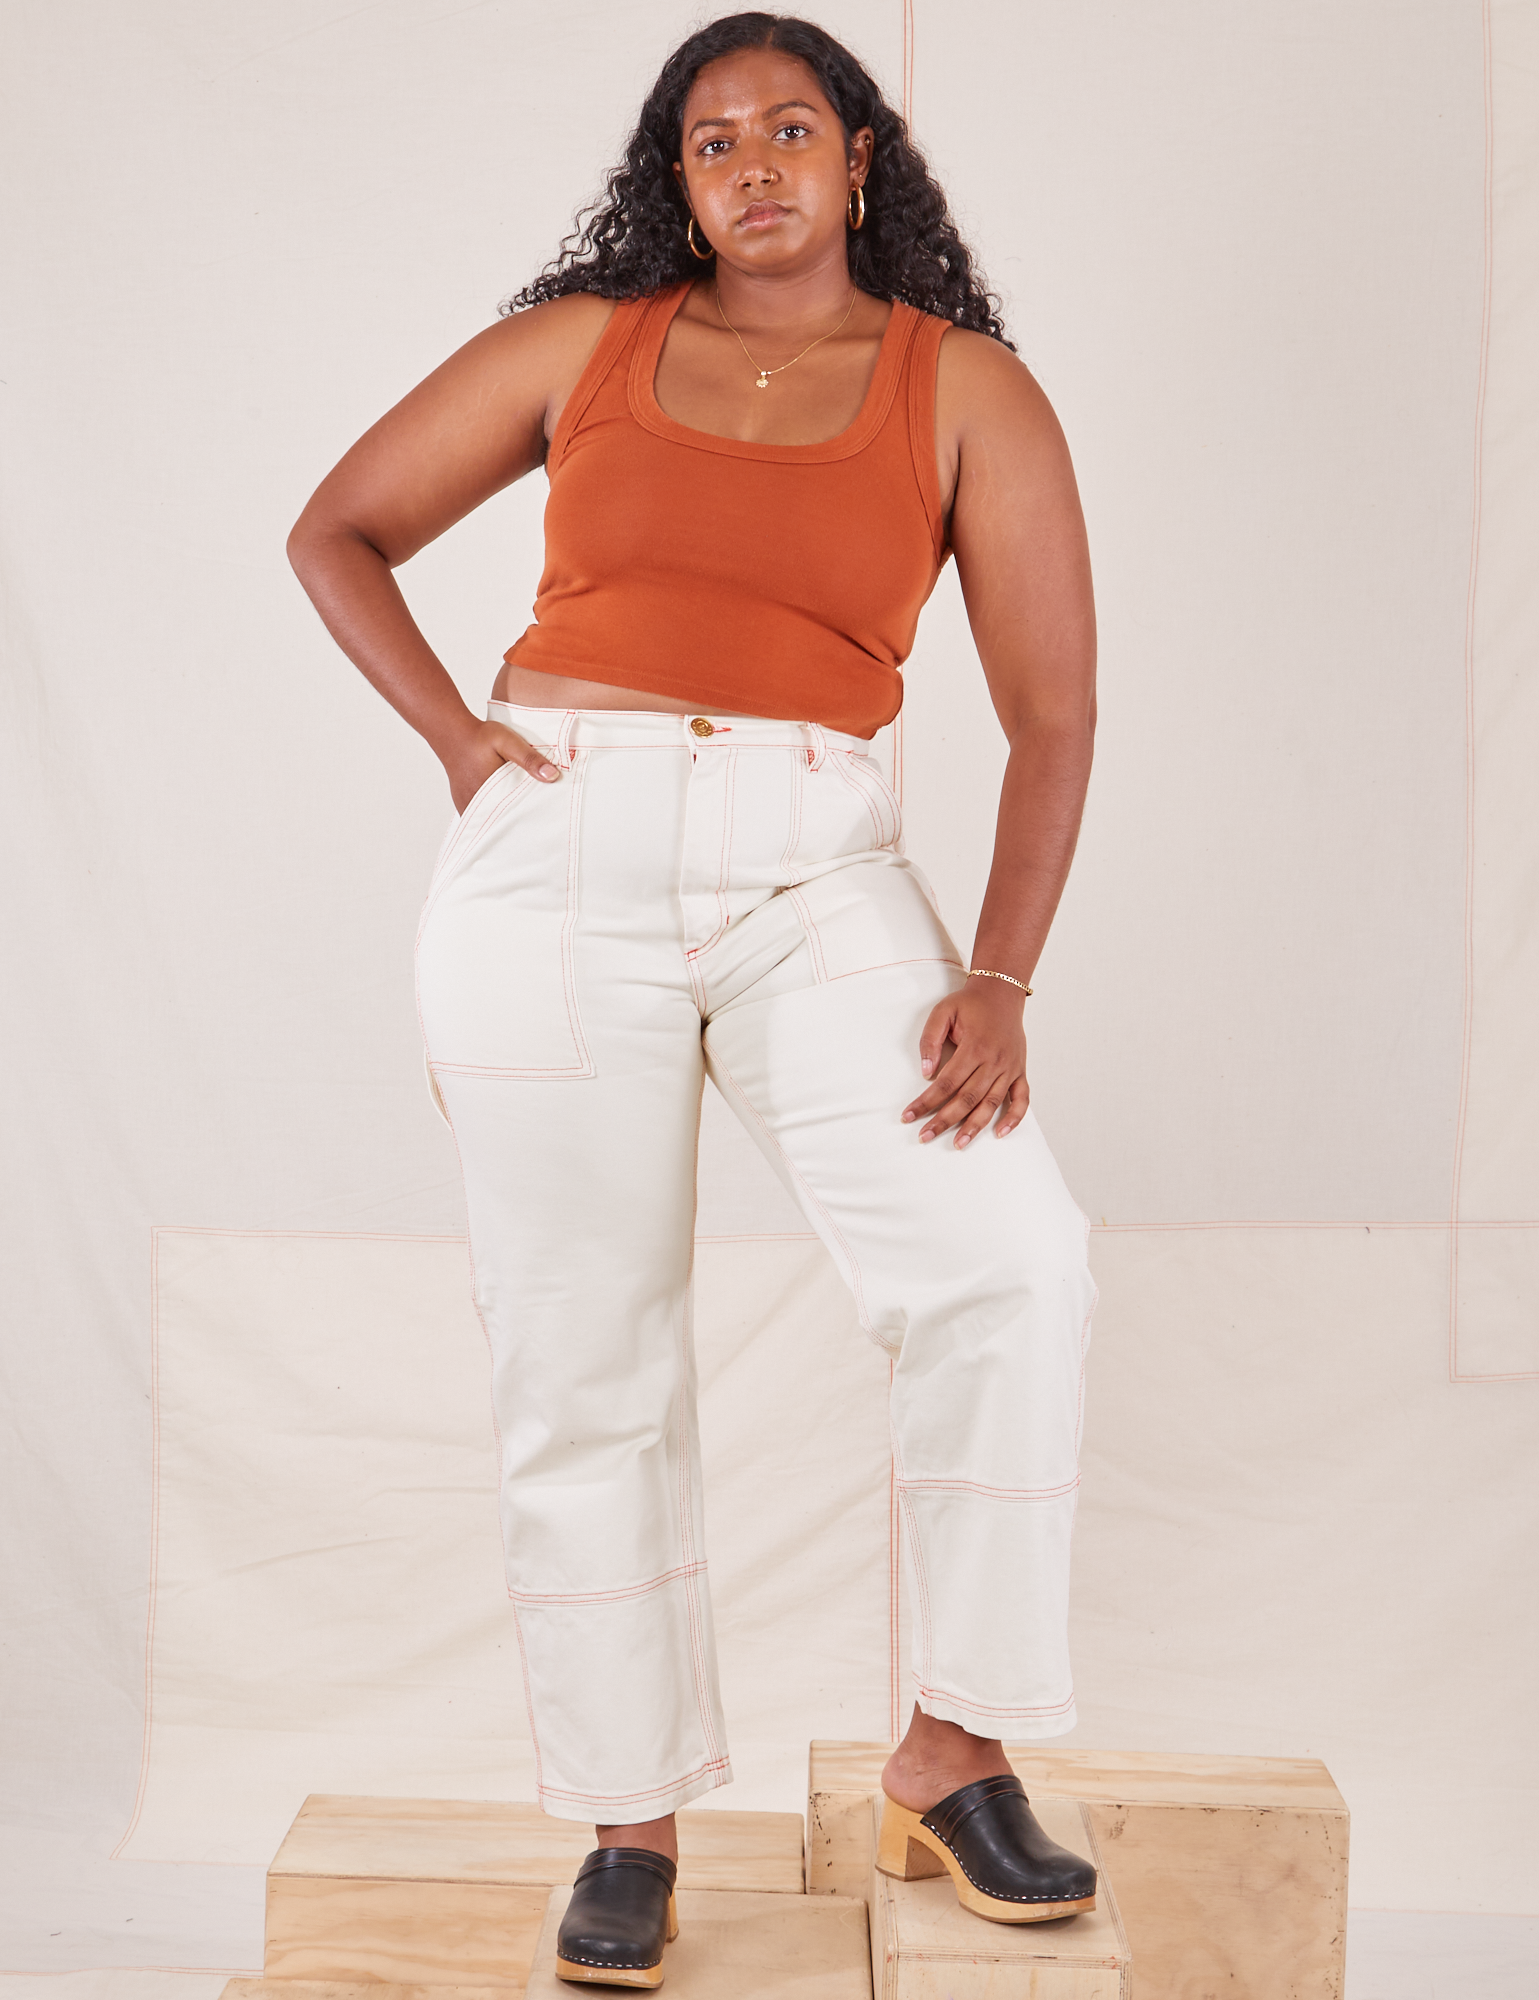 Meghna is 5&#39;8&quot; and wearing L Carpenter Jeans in Vintage Tee Off-White paired with burnt terracotta Cropped Tank Top